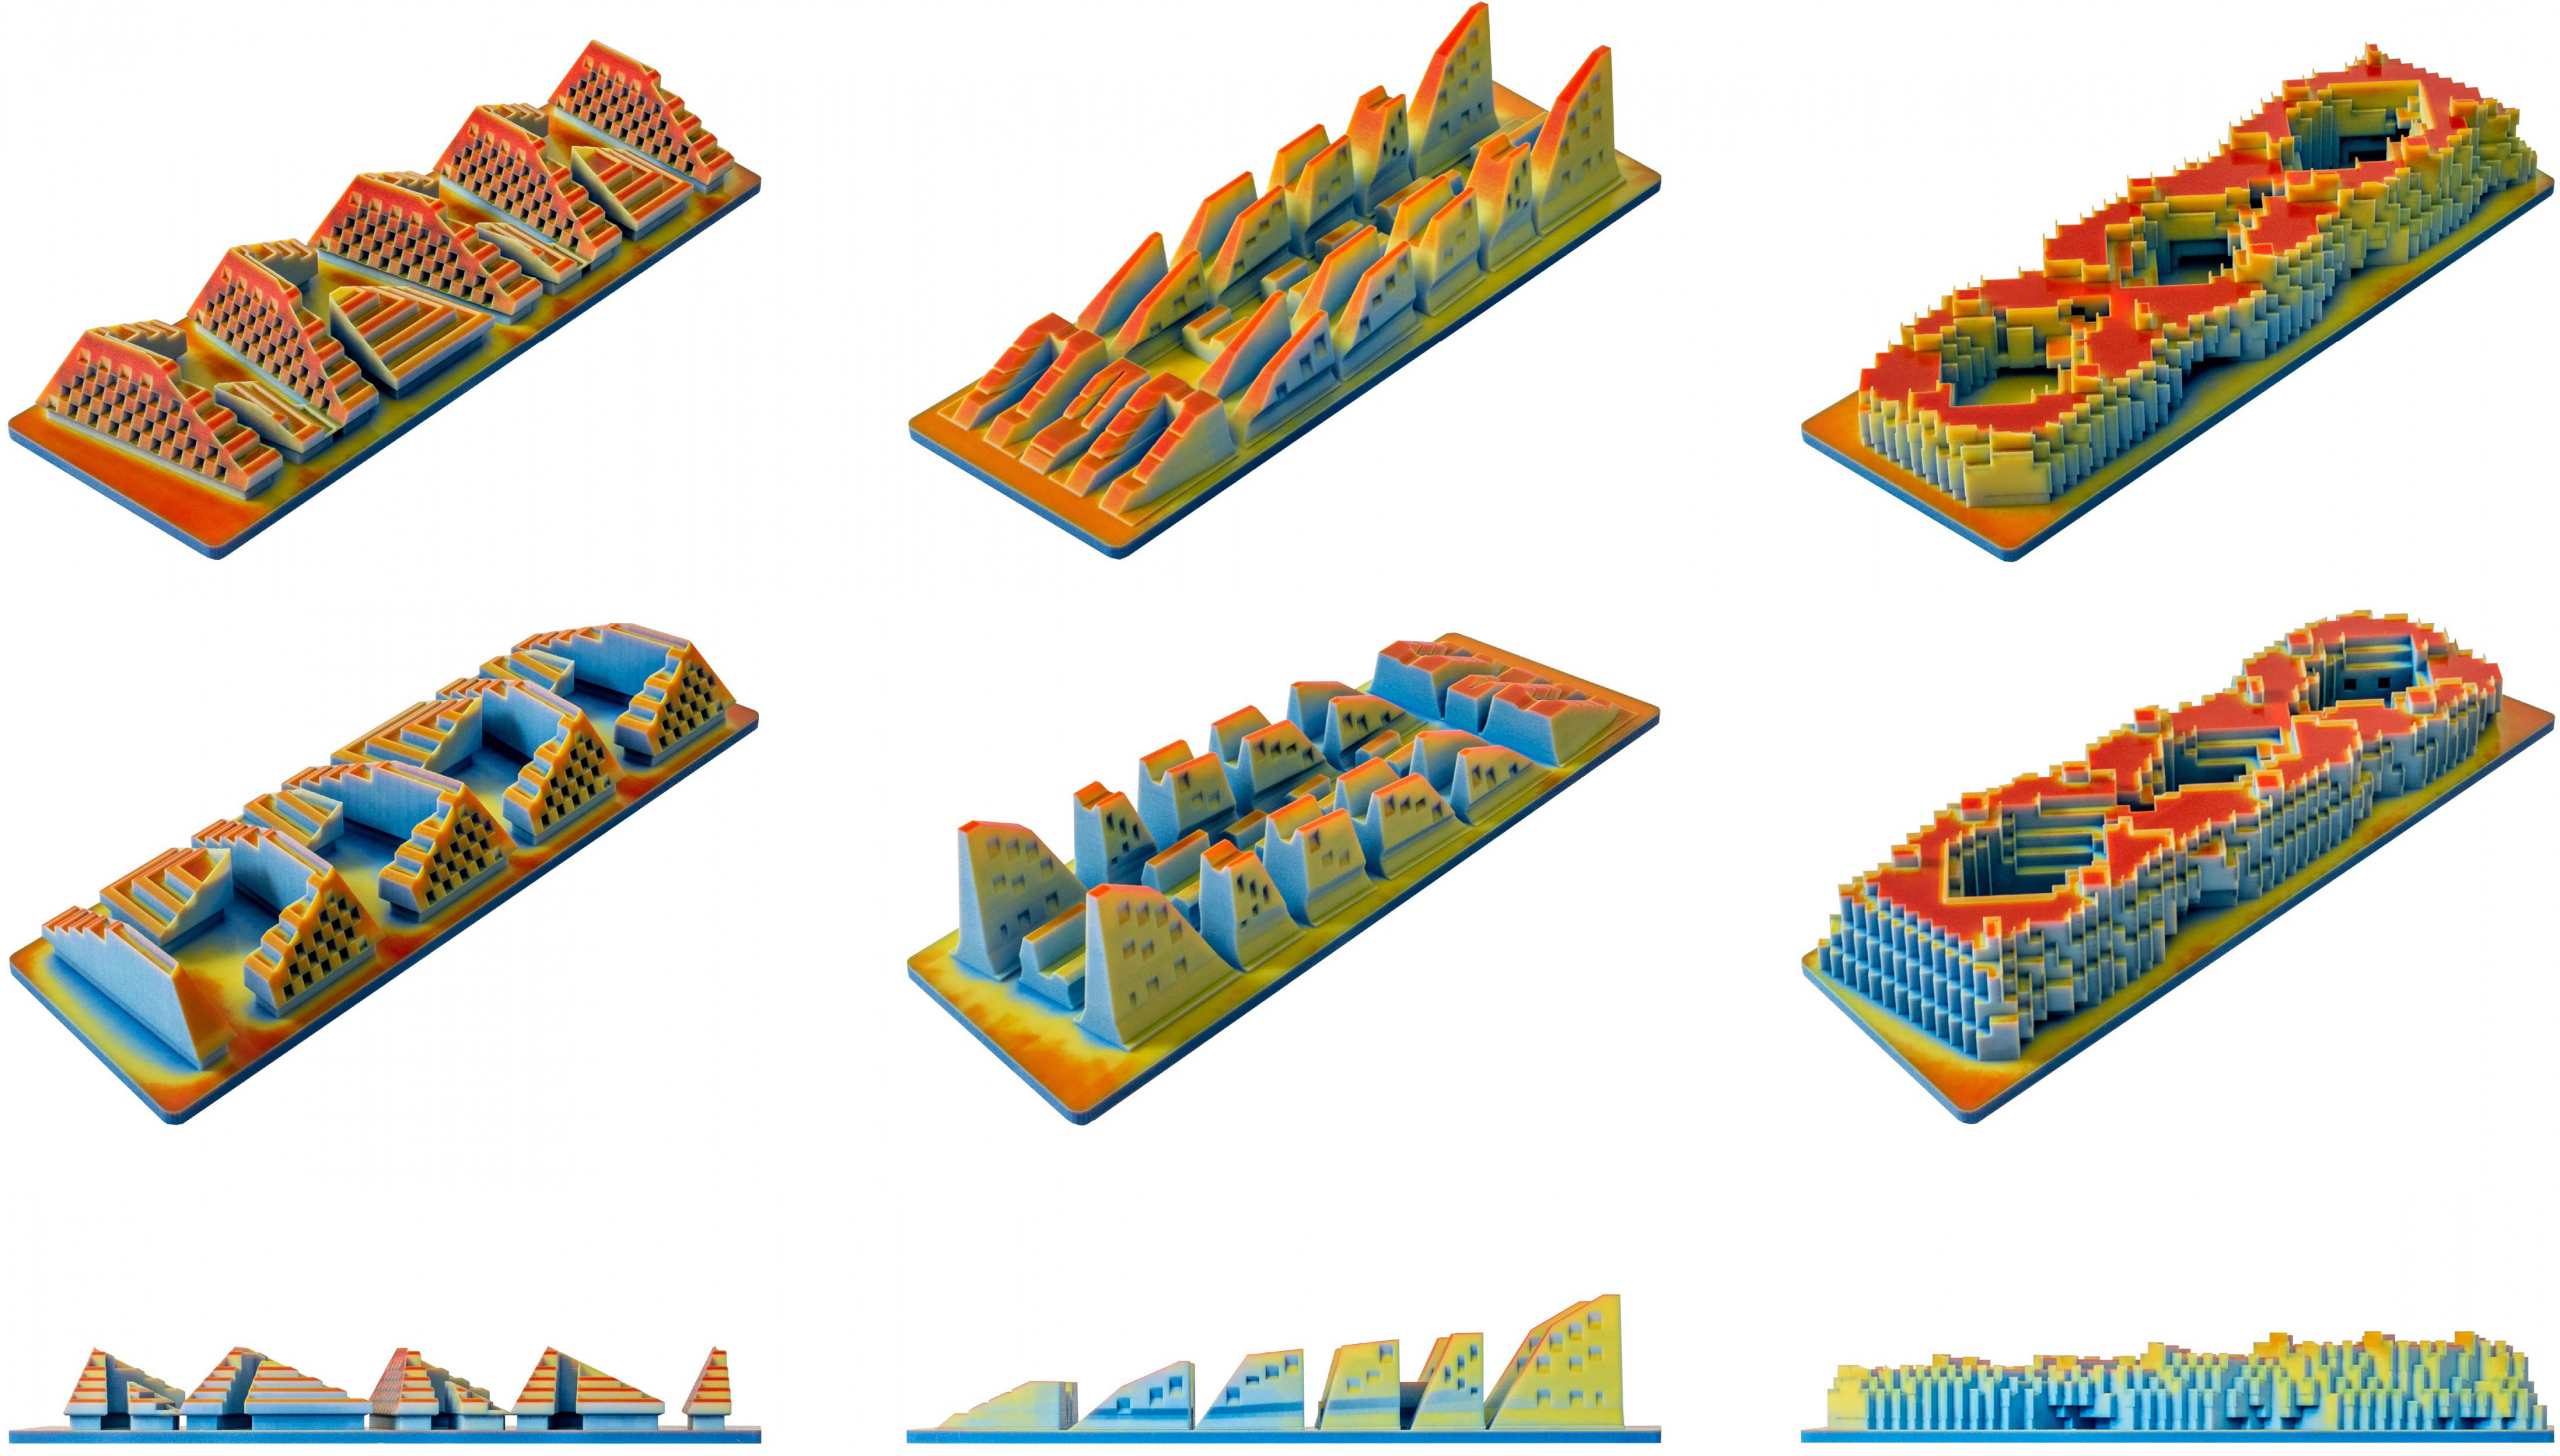 3-dimensional multi-colored renderings of building shapes